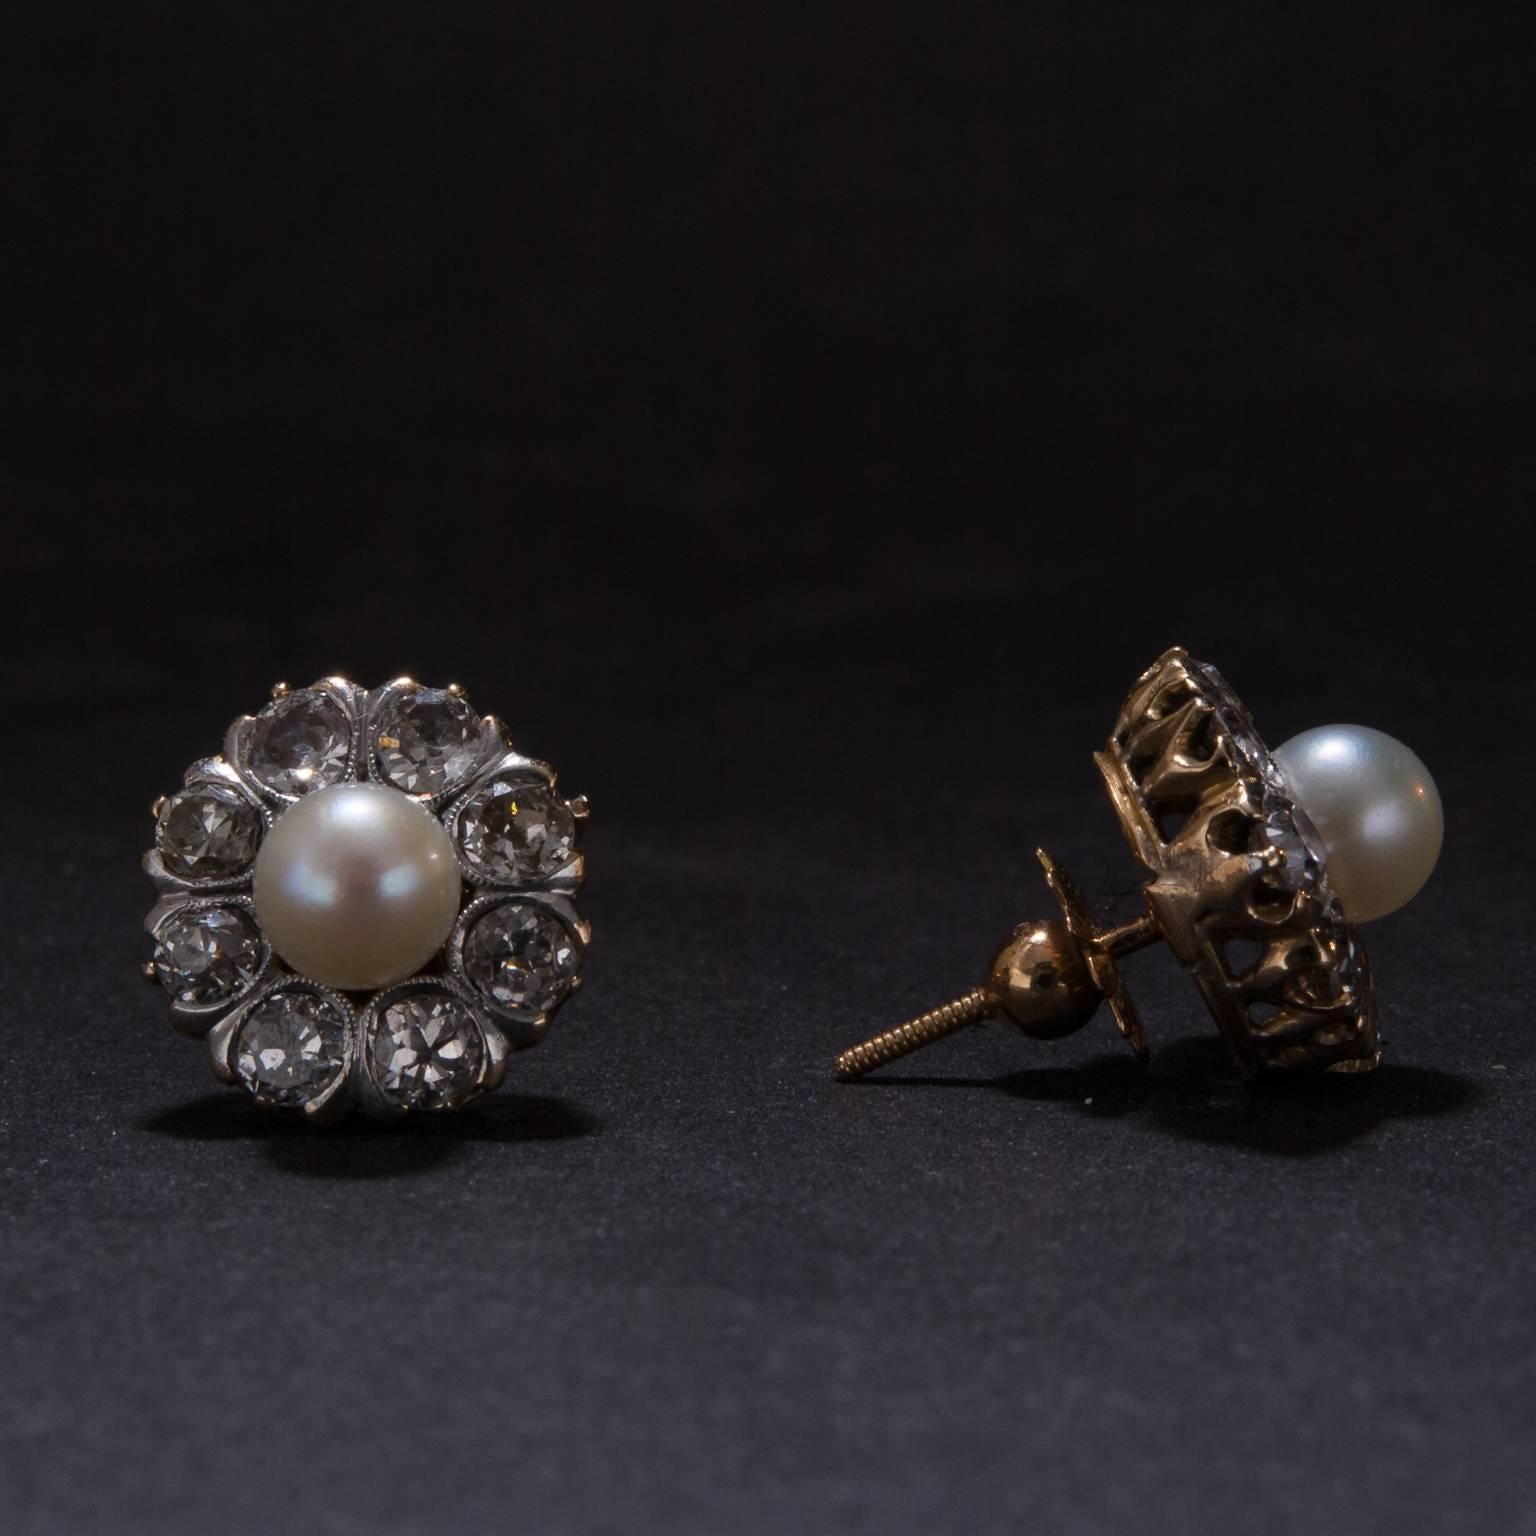 Pearl and Old European Cut Diamond Earrings in Platinum over Gold In Good Condition For Sale In Carmel, CA